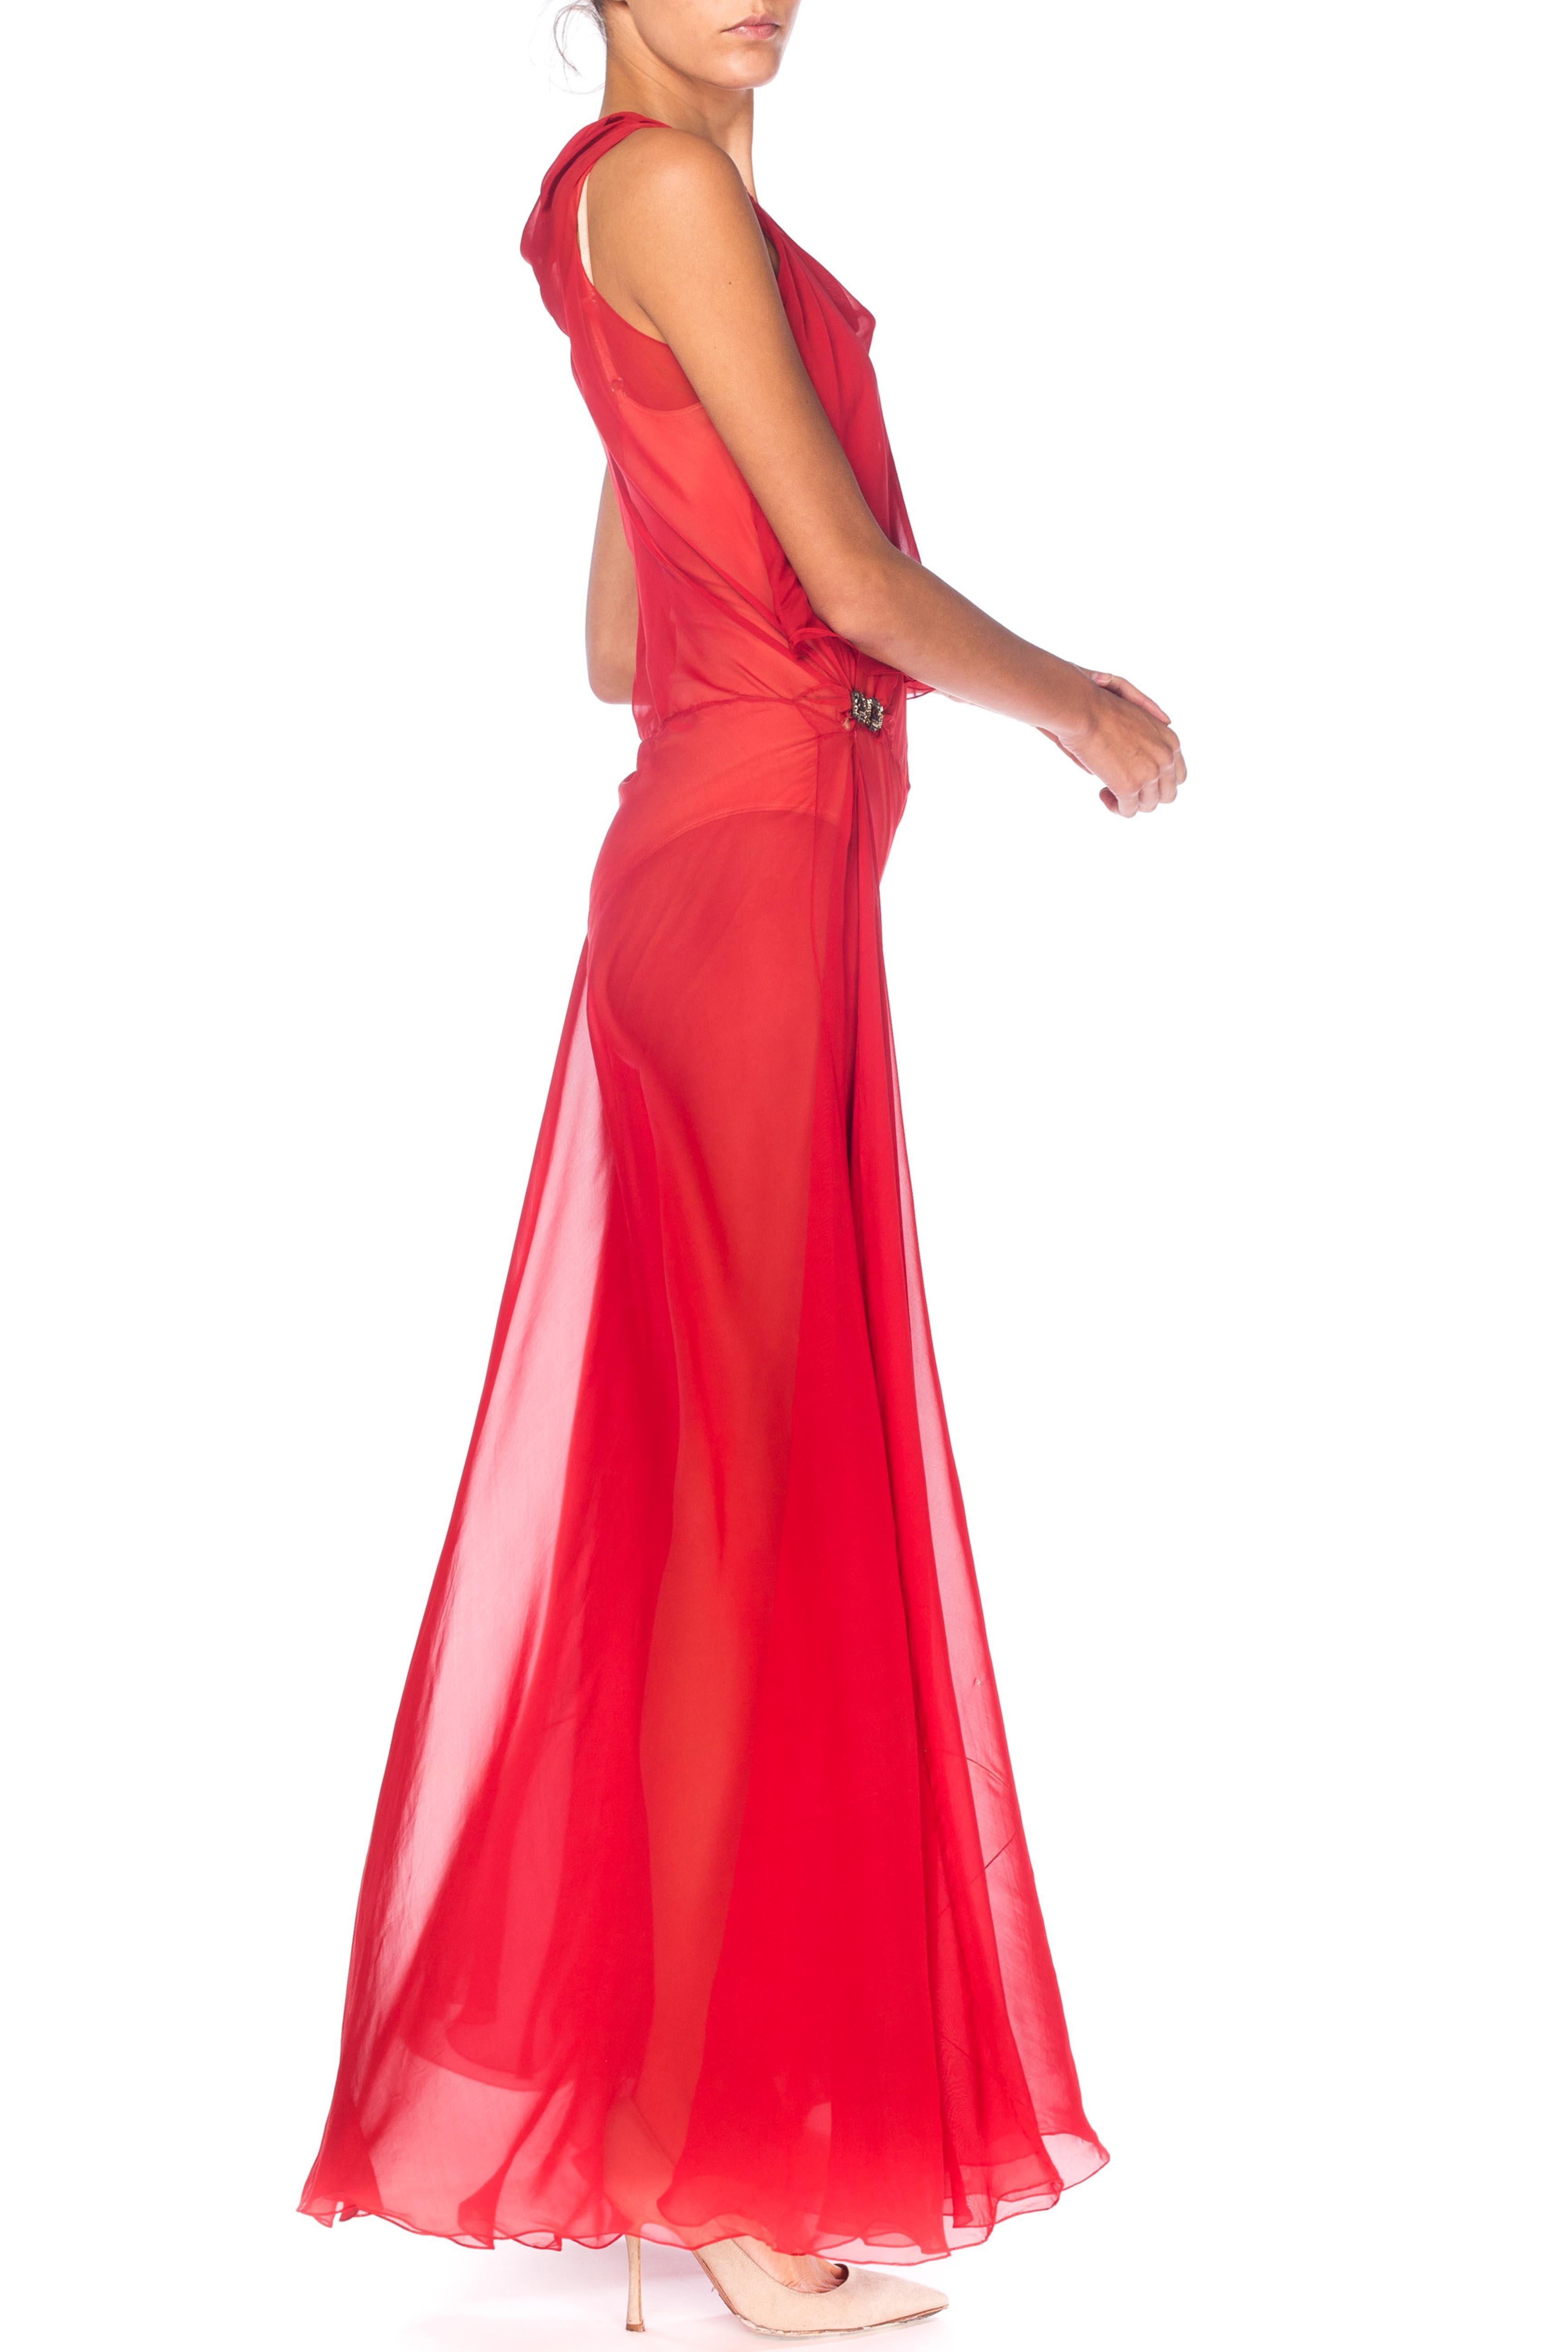 1930S Red Sheer Silk Chiffon Bias-Cut Gown With Deco Clasps On Hips For Sale 2